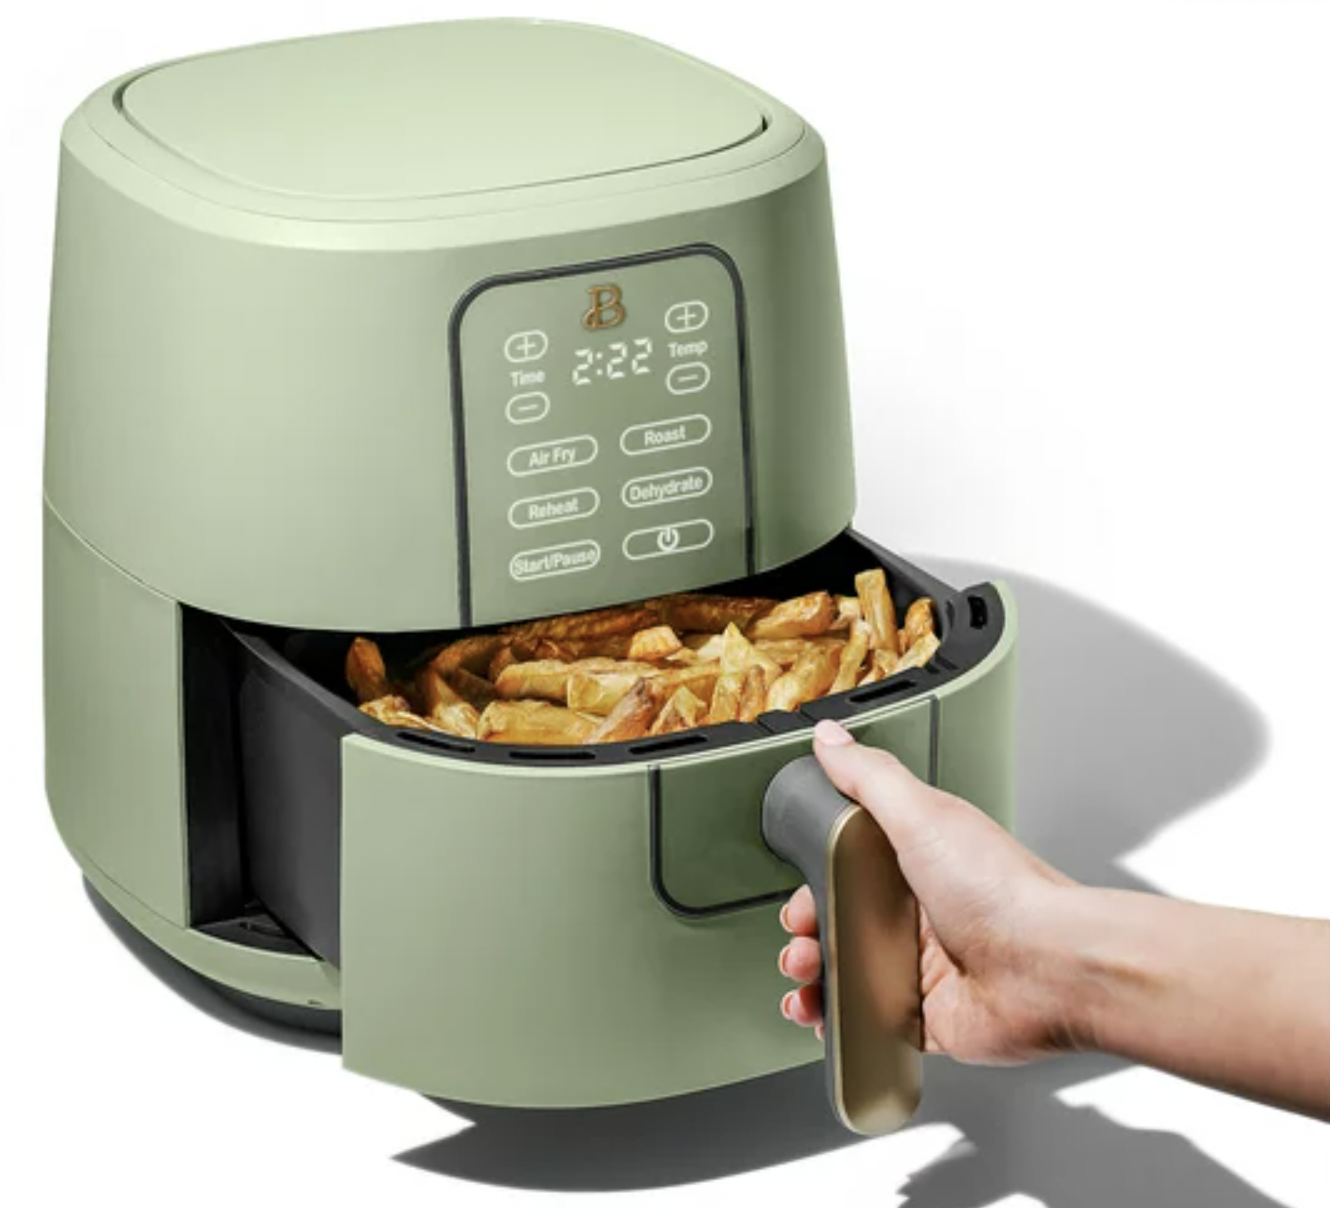 Dash Compact Air Fryer review: no-frills frying